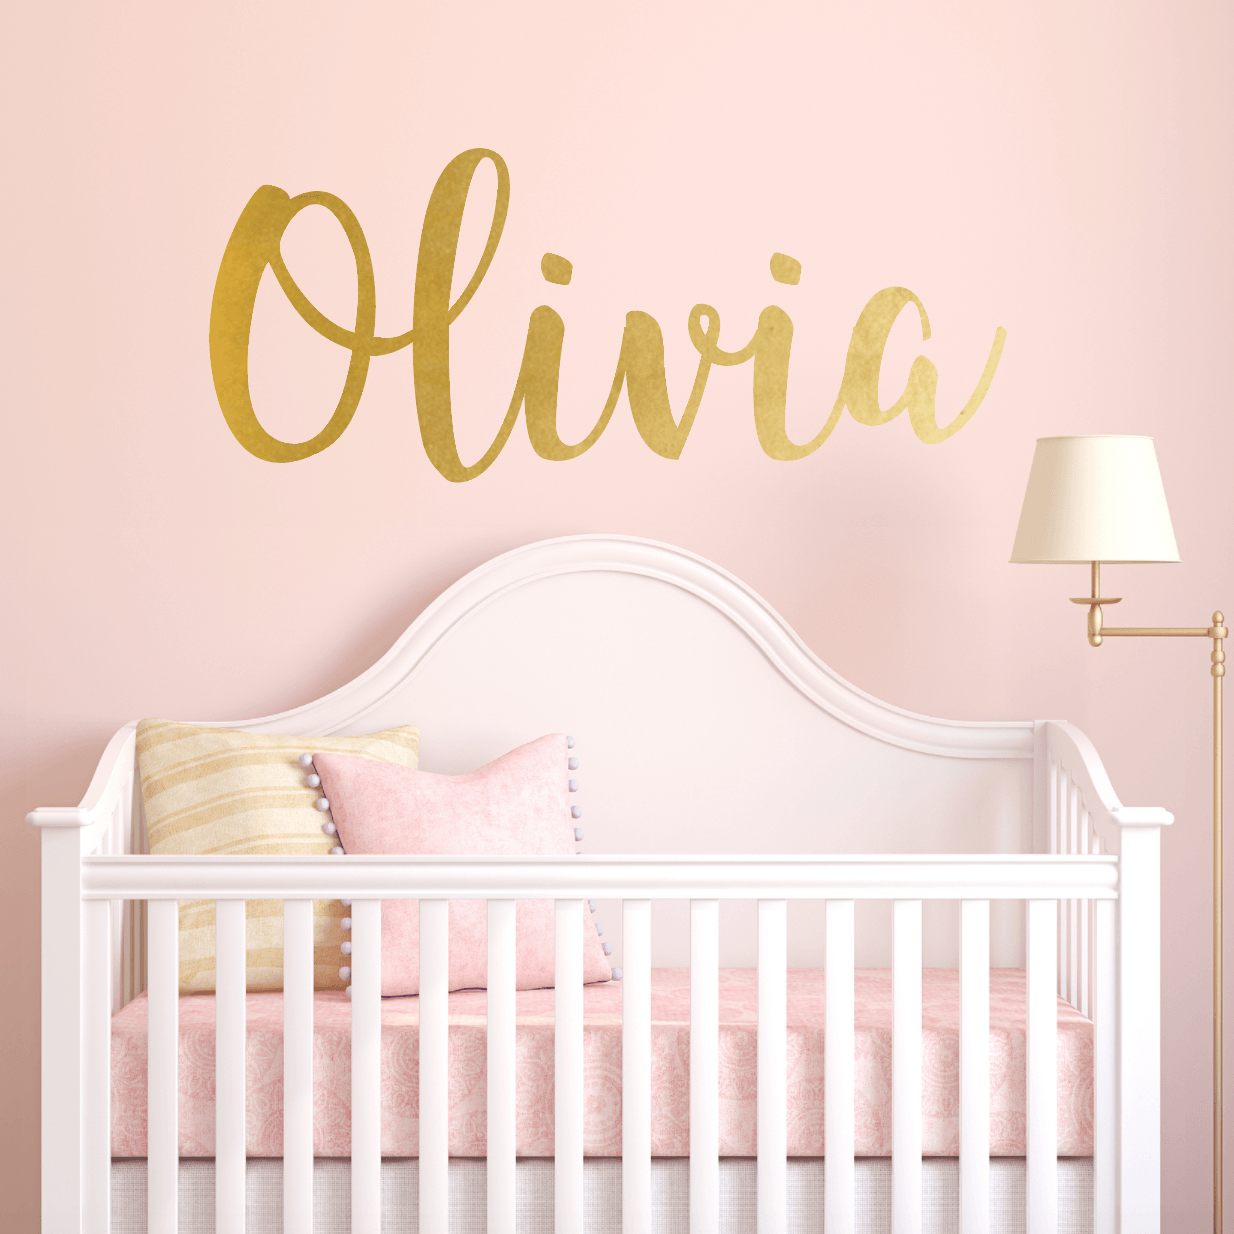 Personalized Childrens Wall Decal - Girls Name Wall Decal - Nursery Wall Decal - Personalized Name Decal - Vinyl Wall Decal